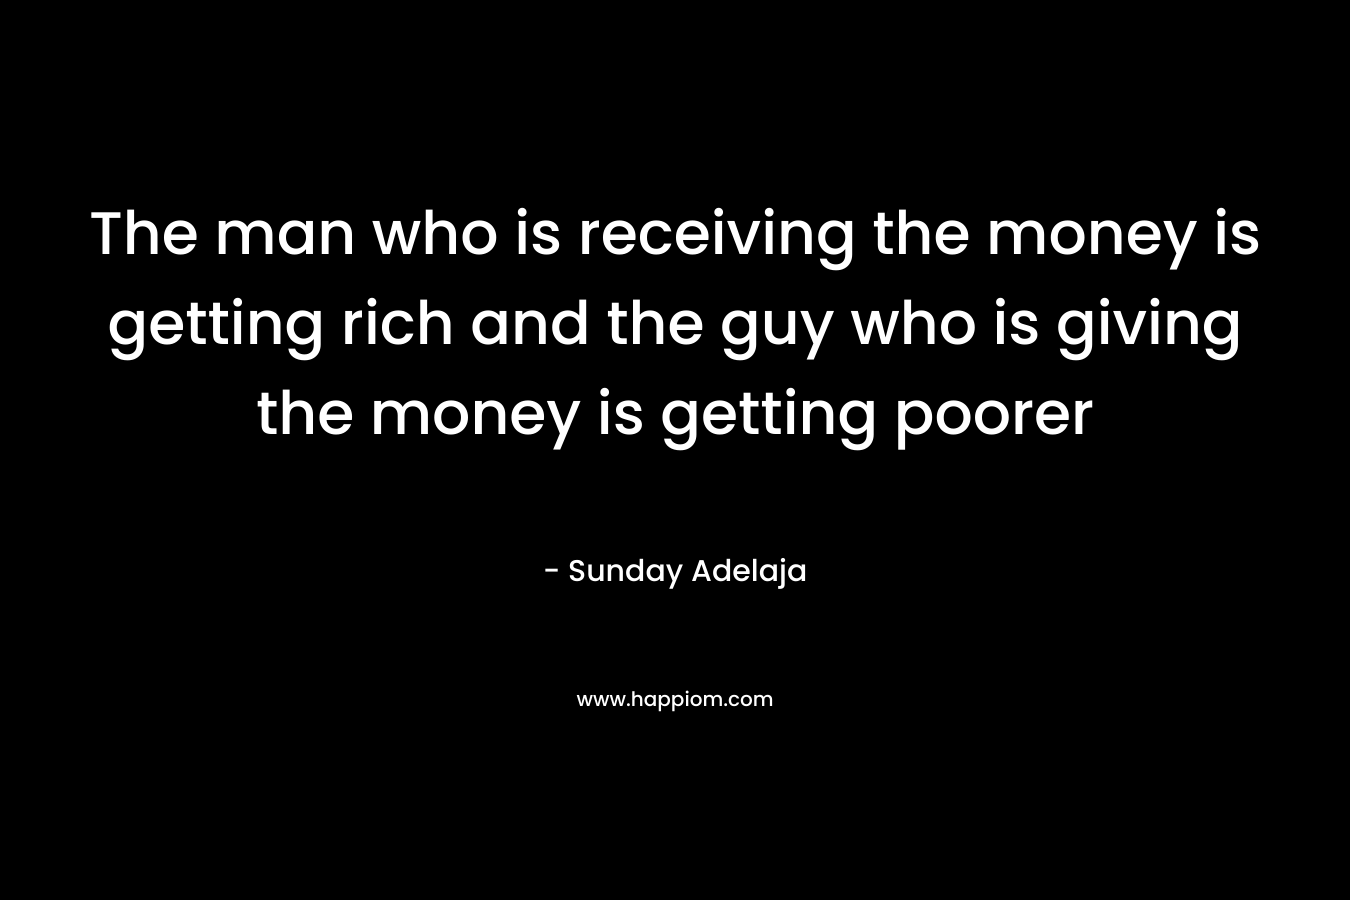 The man who is receiving the money is getting rich and the guy who is giving the money is getting poorer